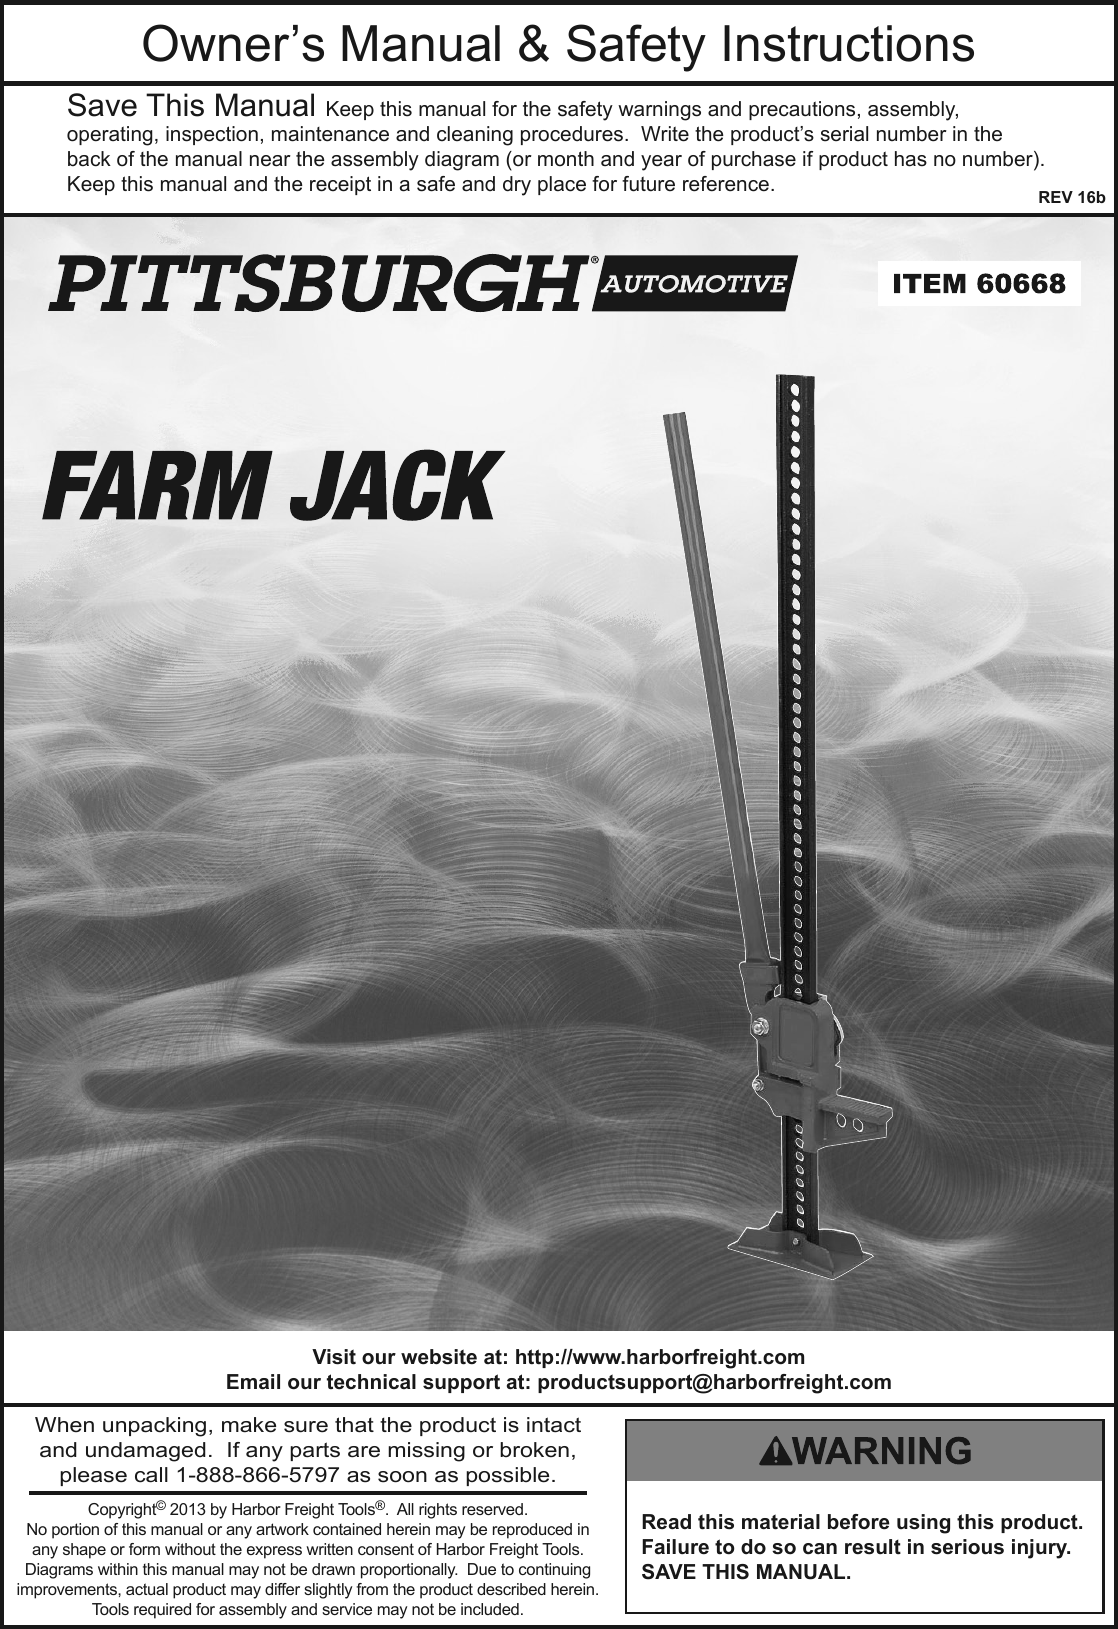 Page 1 of 8 - Manual For The 60668 42 In. High Lift Farm Jack